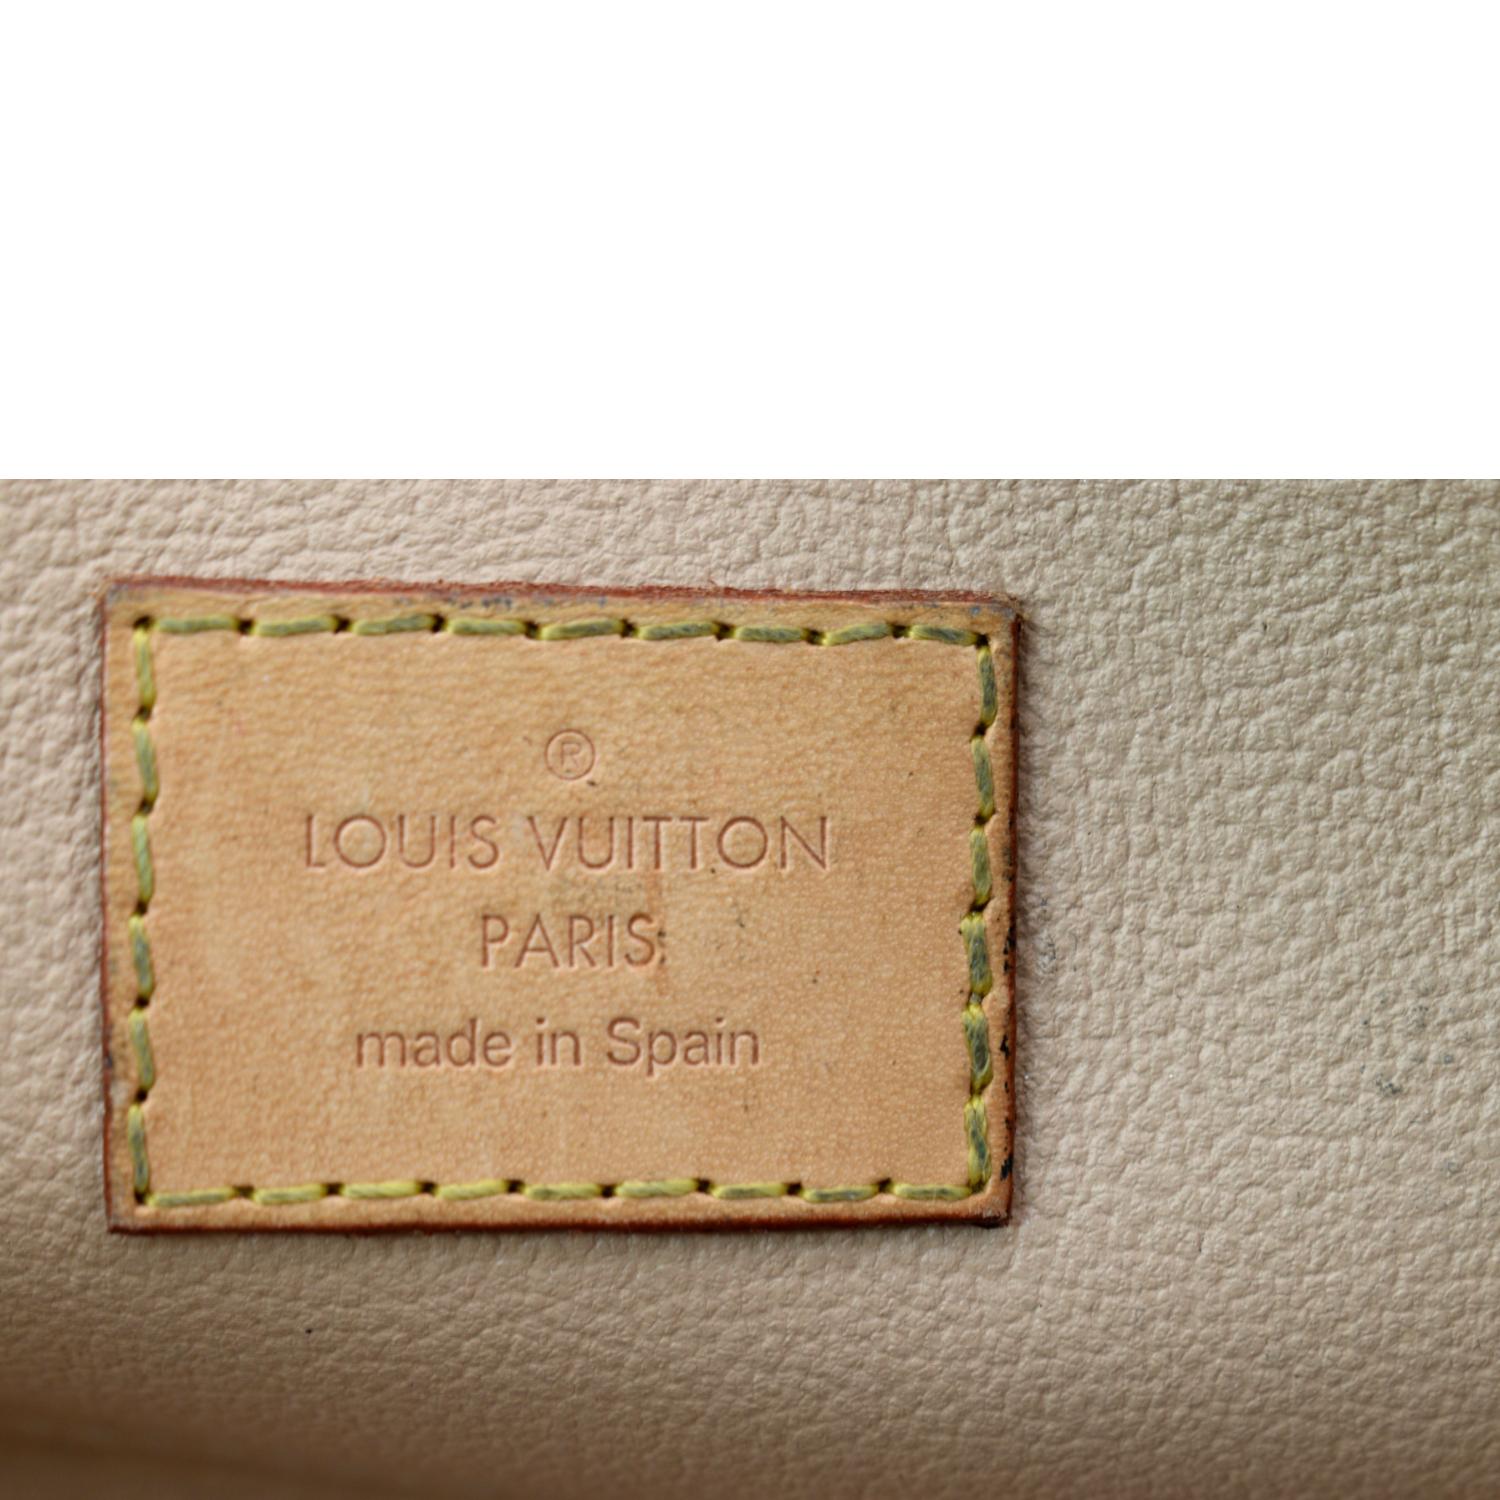 Louis Vuitton Monogram Cosmetic Pouch GM - Brown Cosmetic Bags, Accessories  - LOU808967